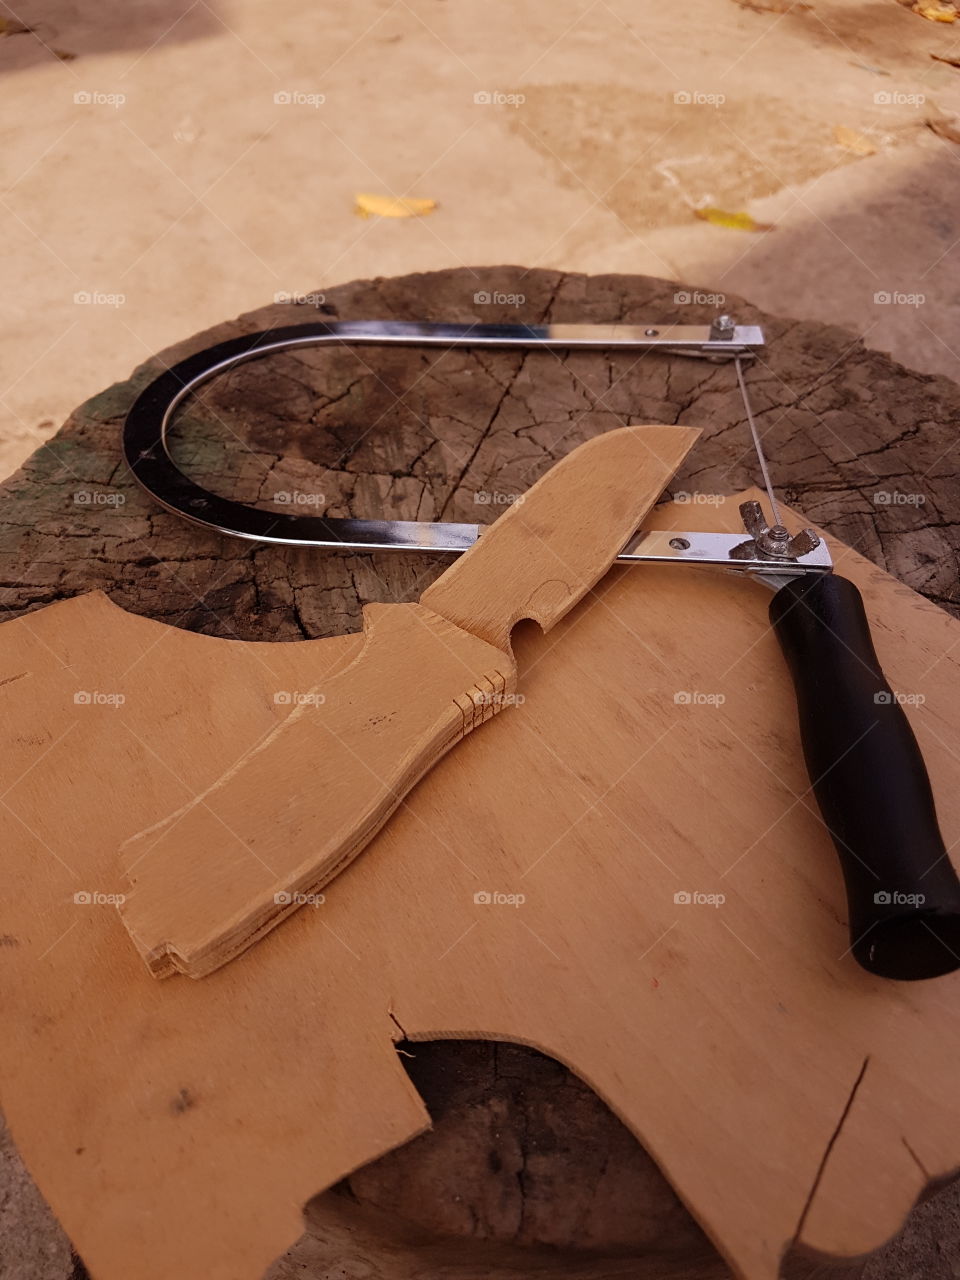 sawing a piece of wooden plywood with a jig saw, skills tool